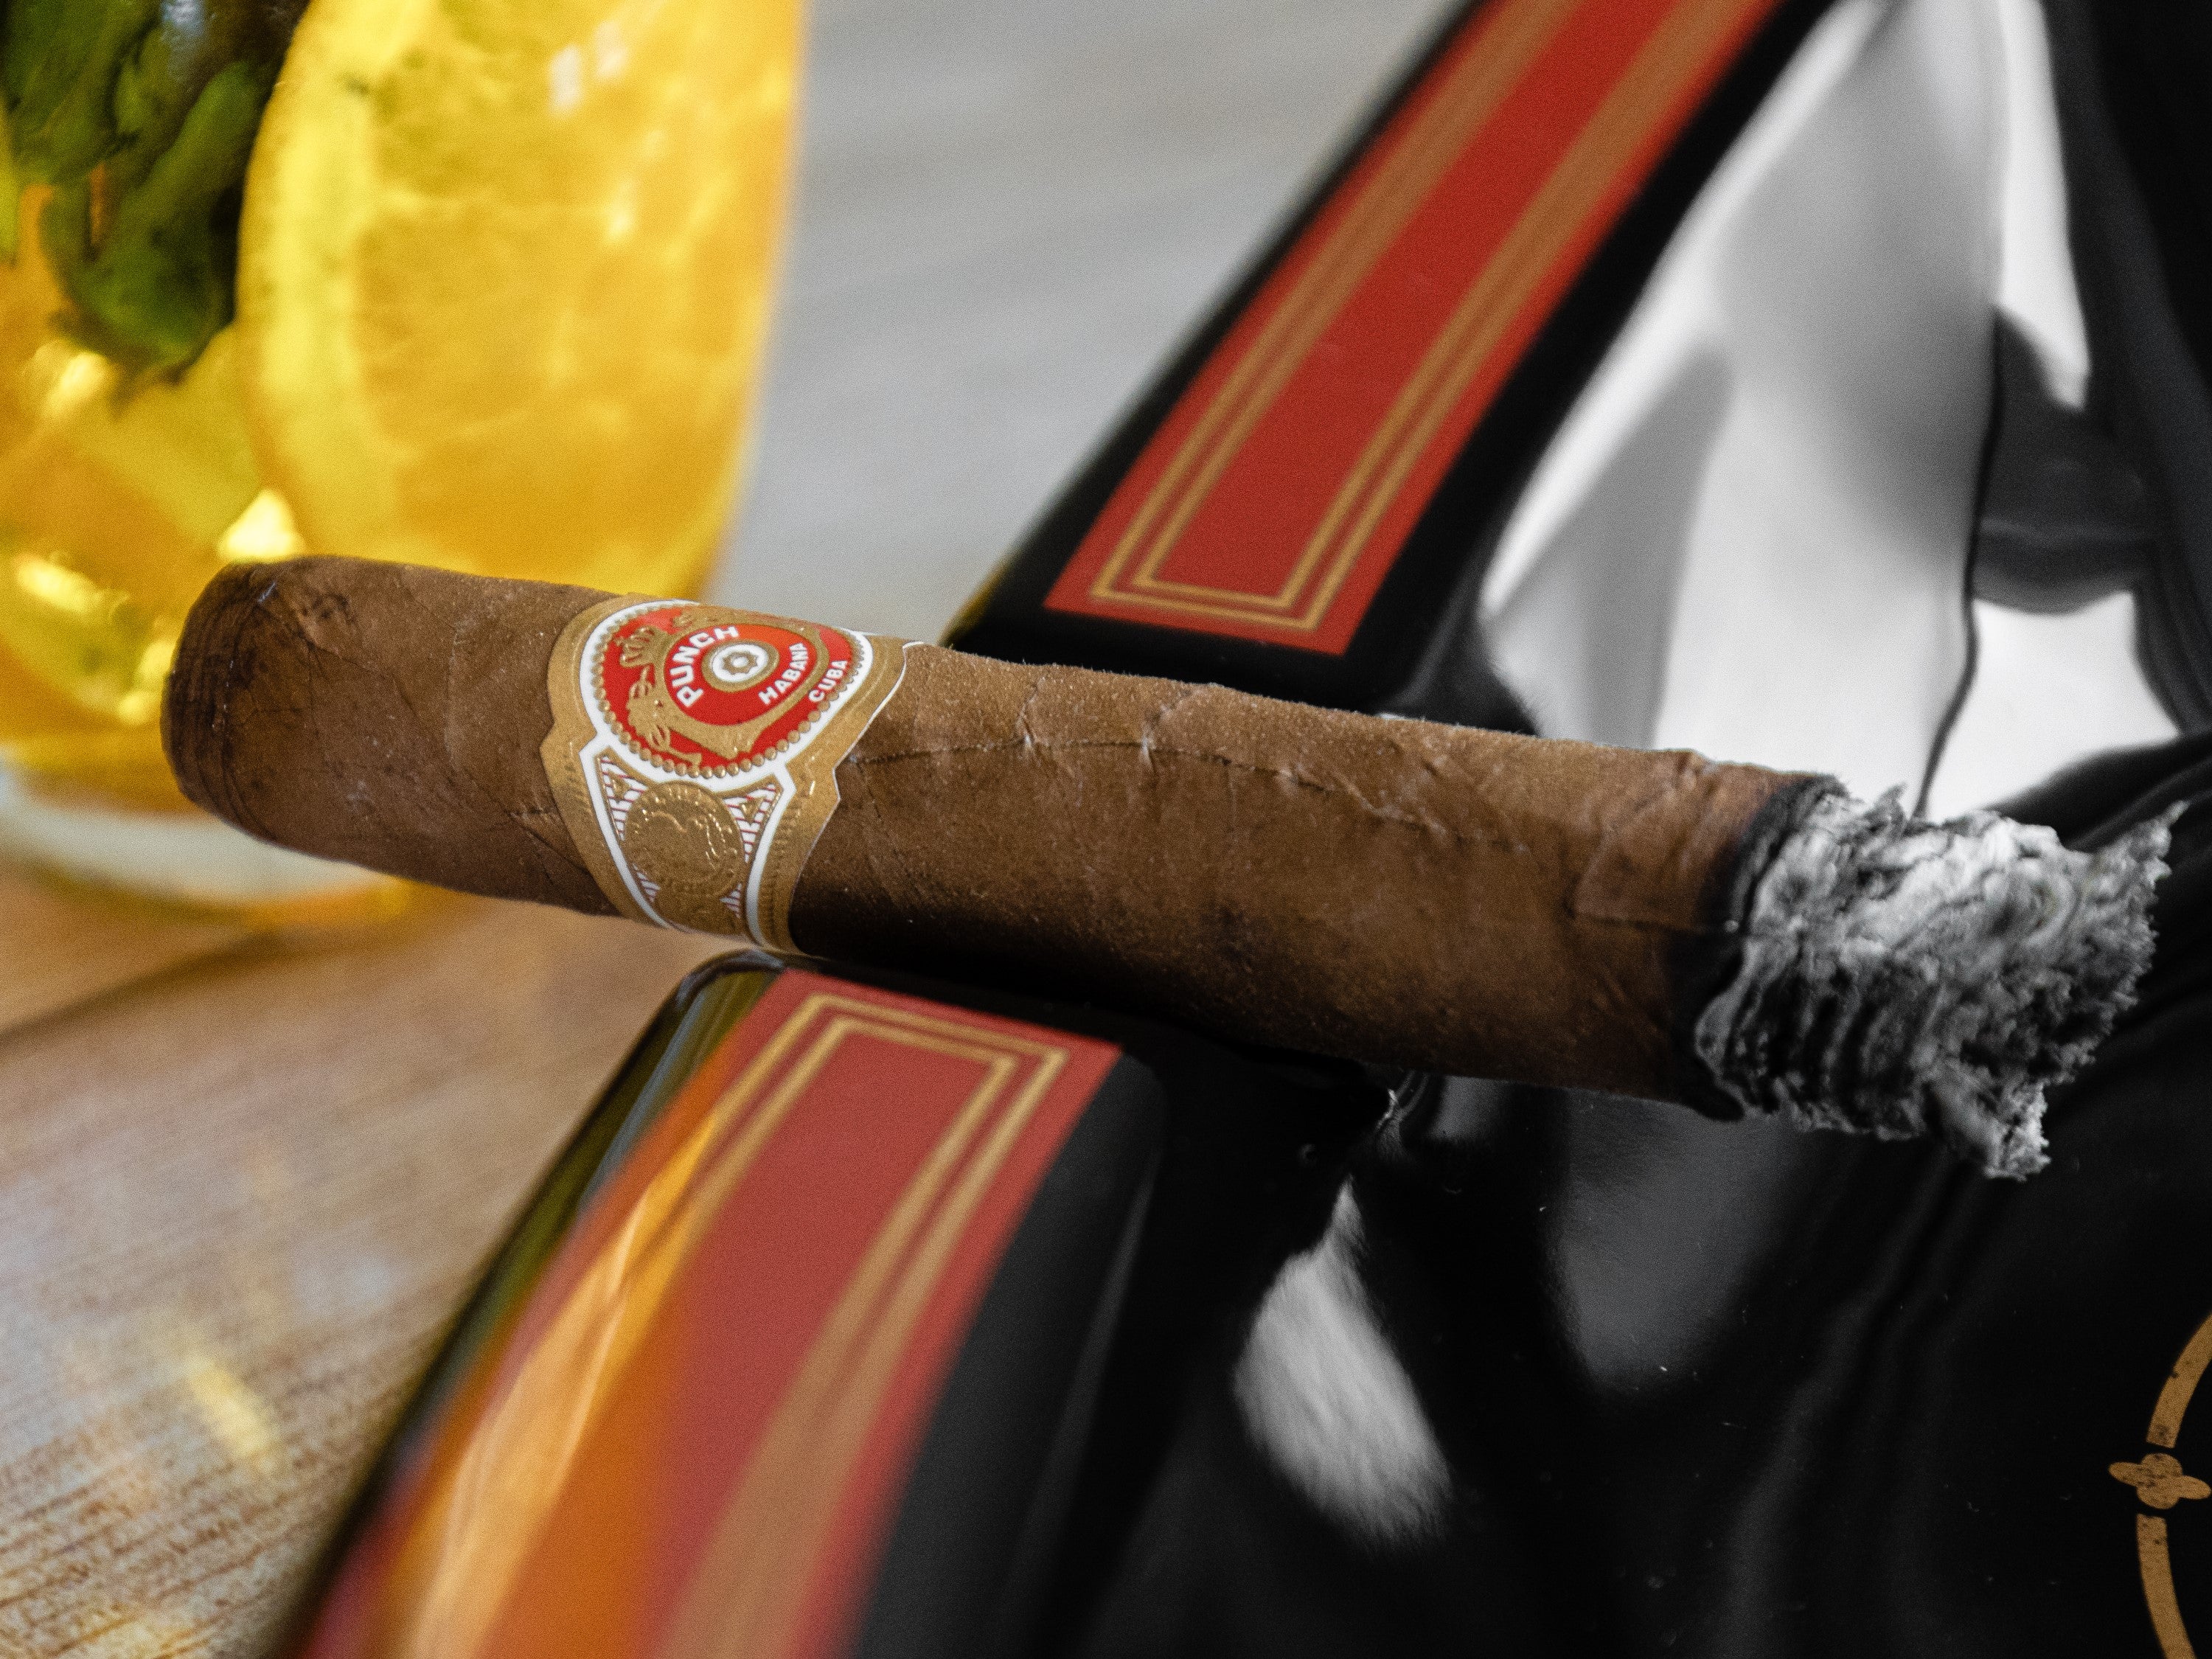 The ash held on beautifully to the end of the Punch Coronations Cuban Cigar